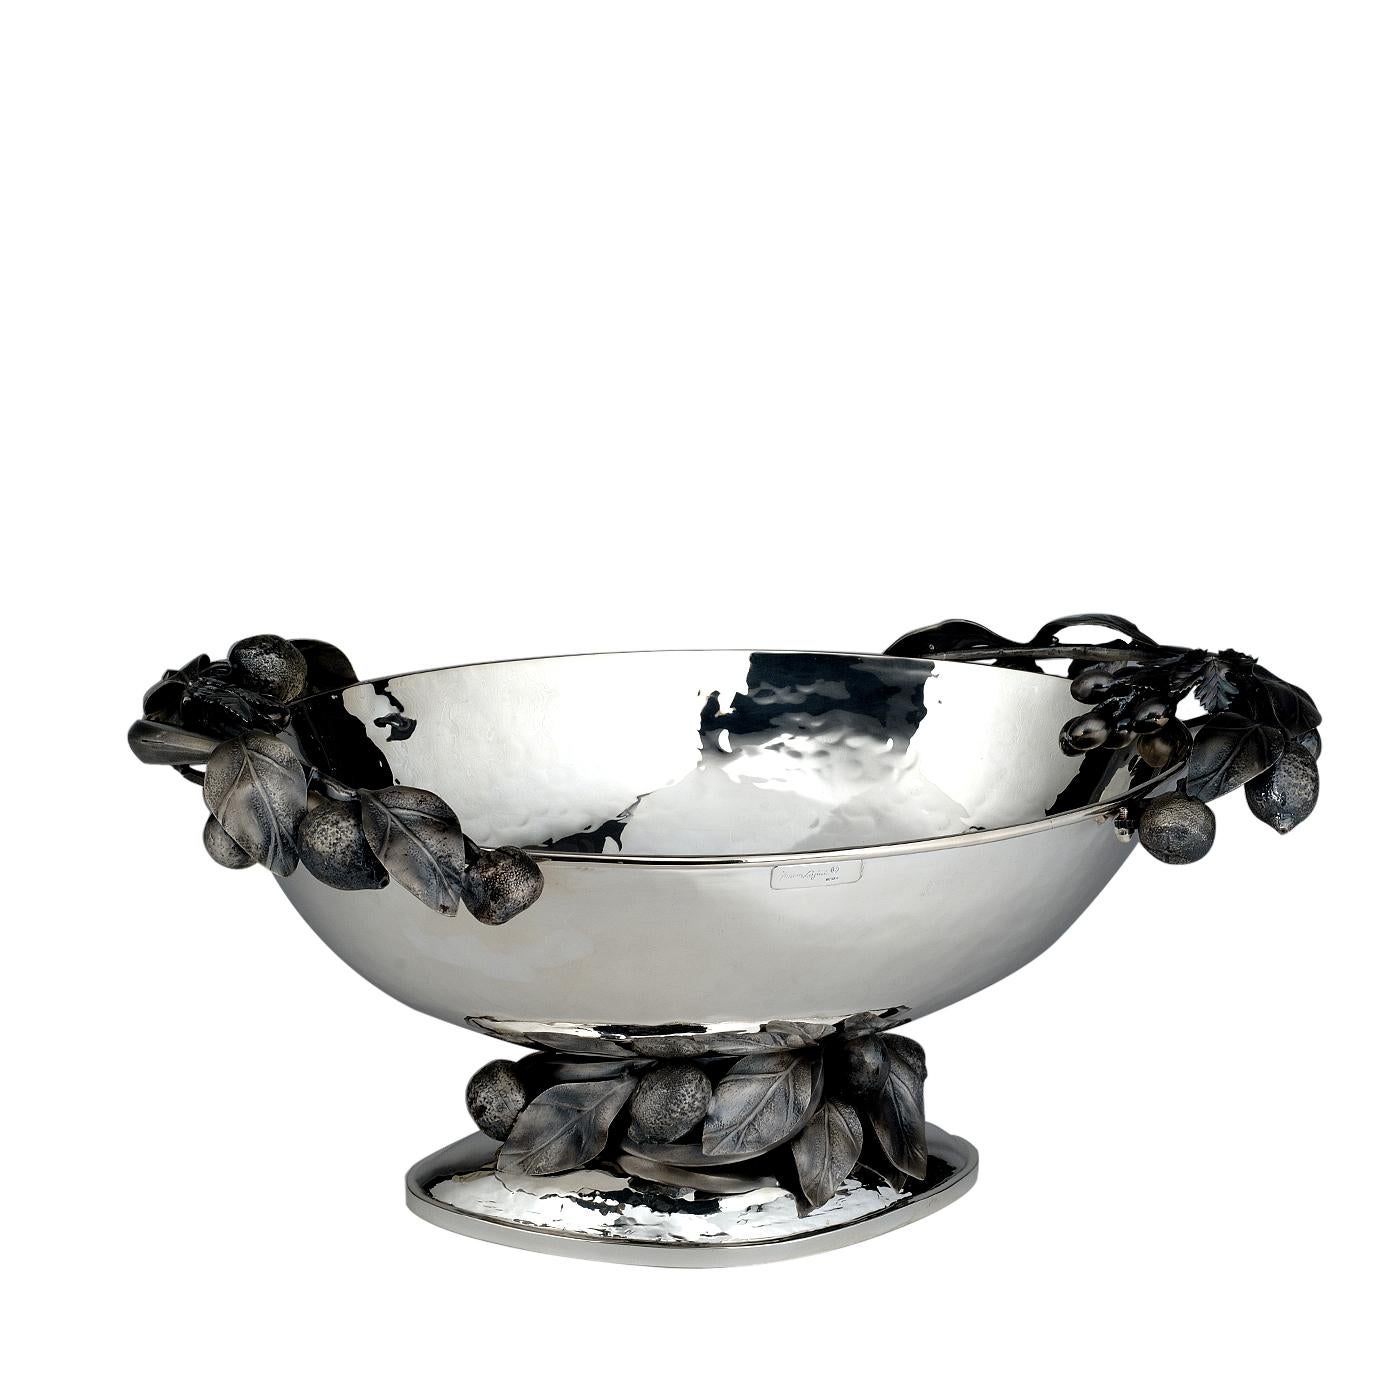 Elegant and sophisticated, this centerpiece will enrich a classic dining room or living room, with its exquisite craftsmanship and the vivid details of its decorations. The generous, oval bowl rests on a small plinth base and both the areas of the